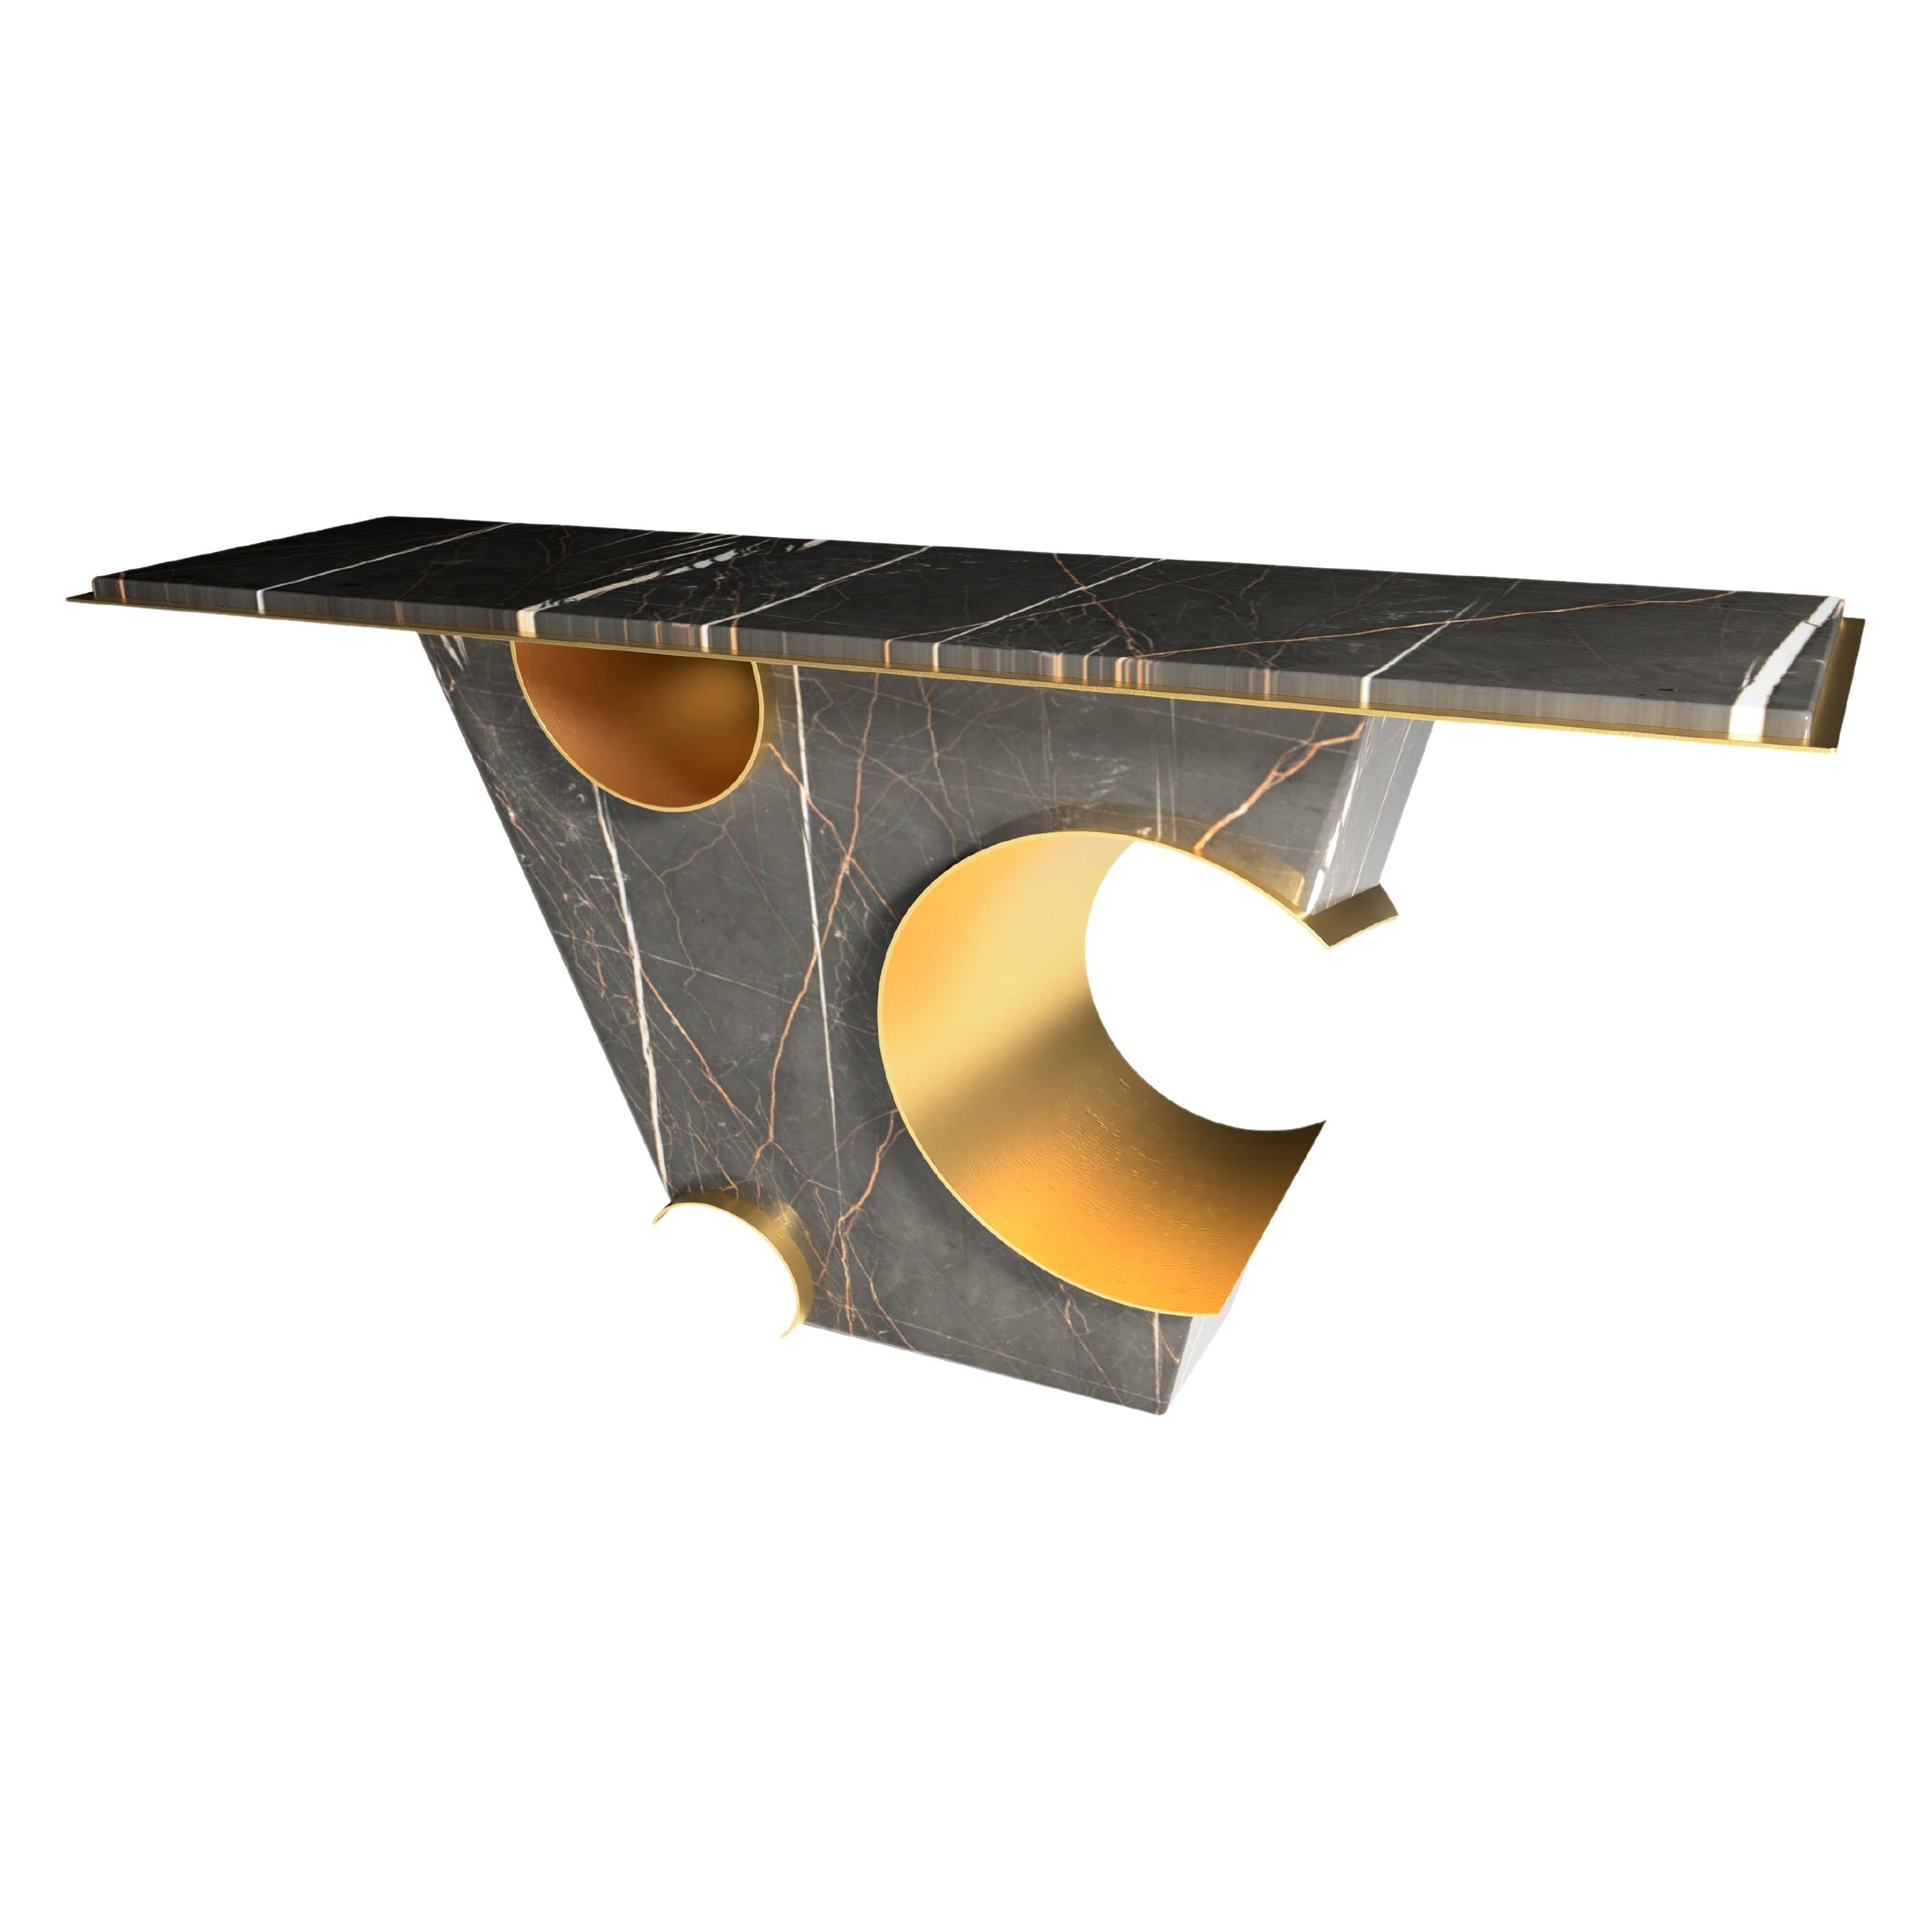 The Galactic Console Table, 1 of 1 by Grzegorz Majka For Sale